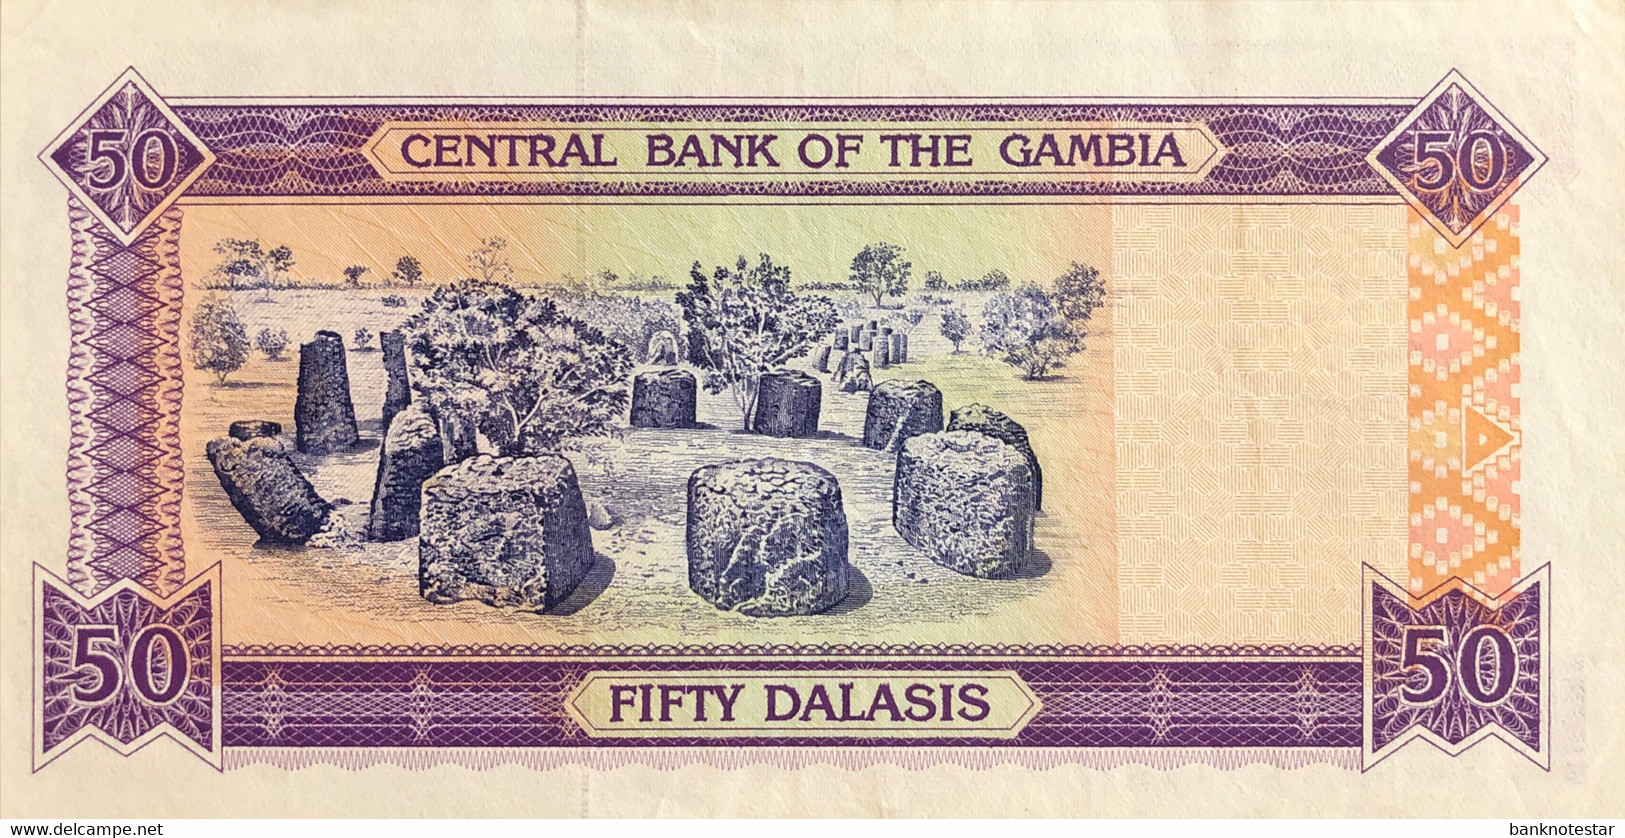 Gambia 50 Dalasis, P-19 (1996) - Extremely Fine - Gambia